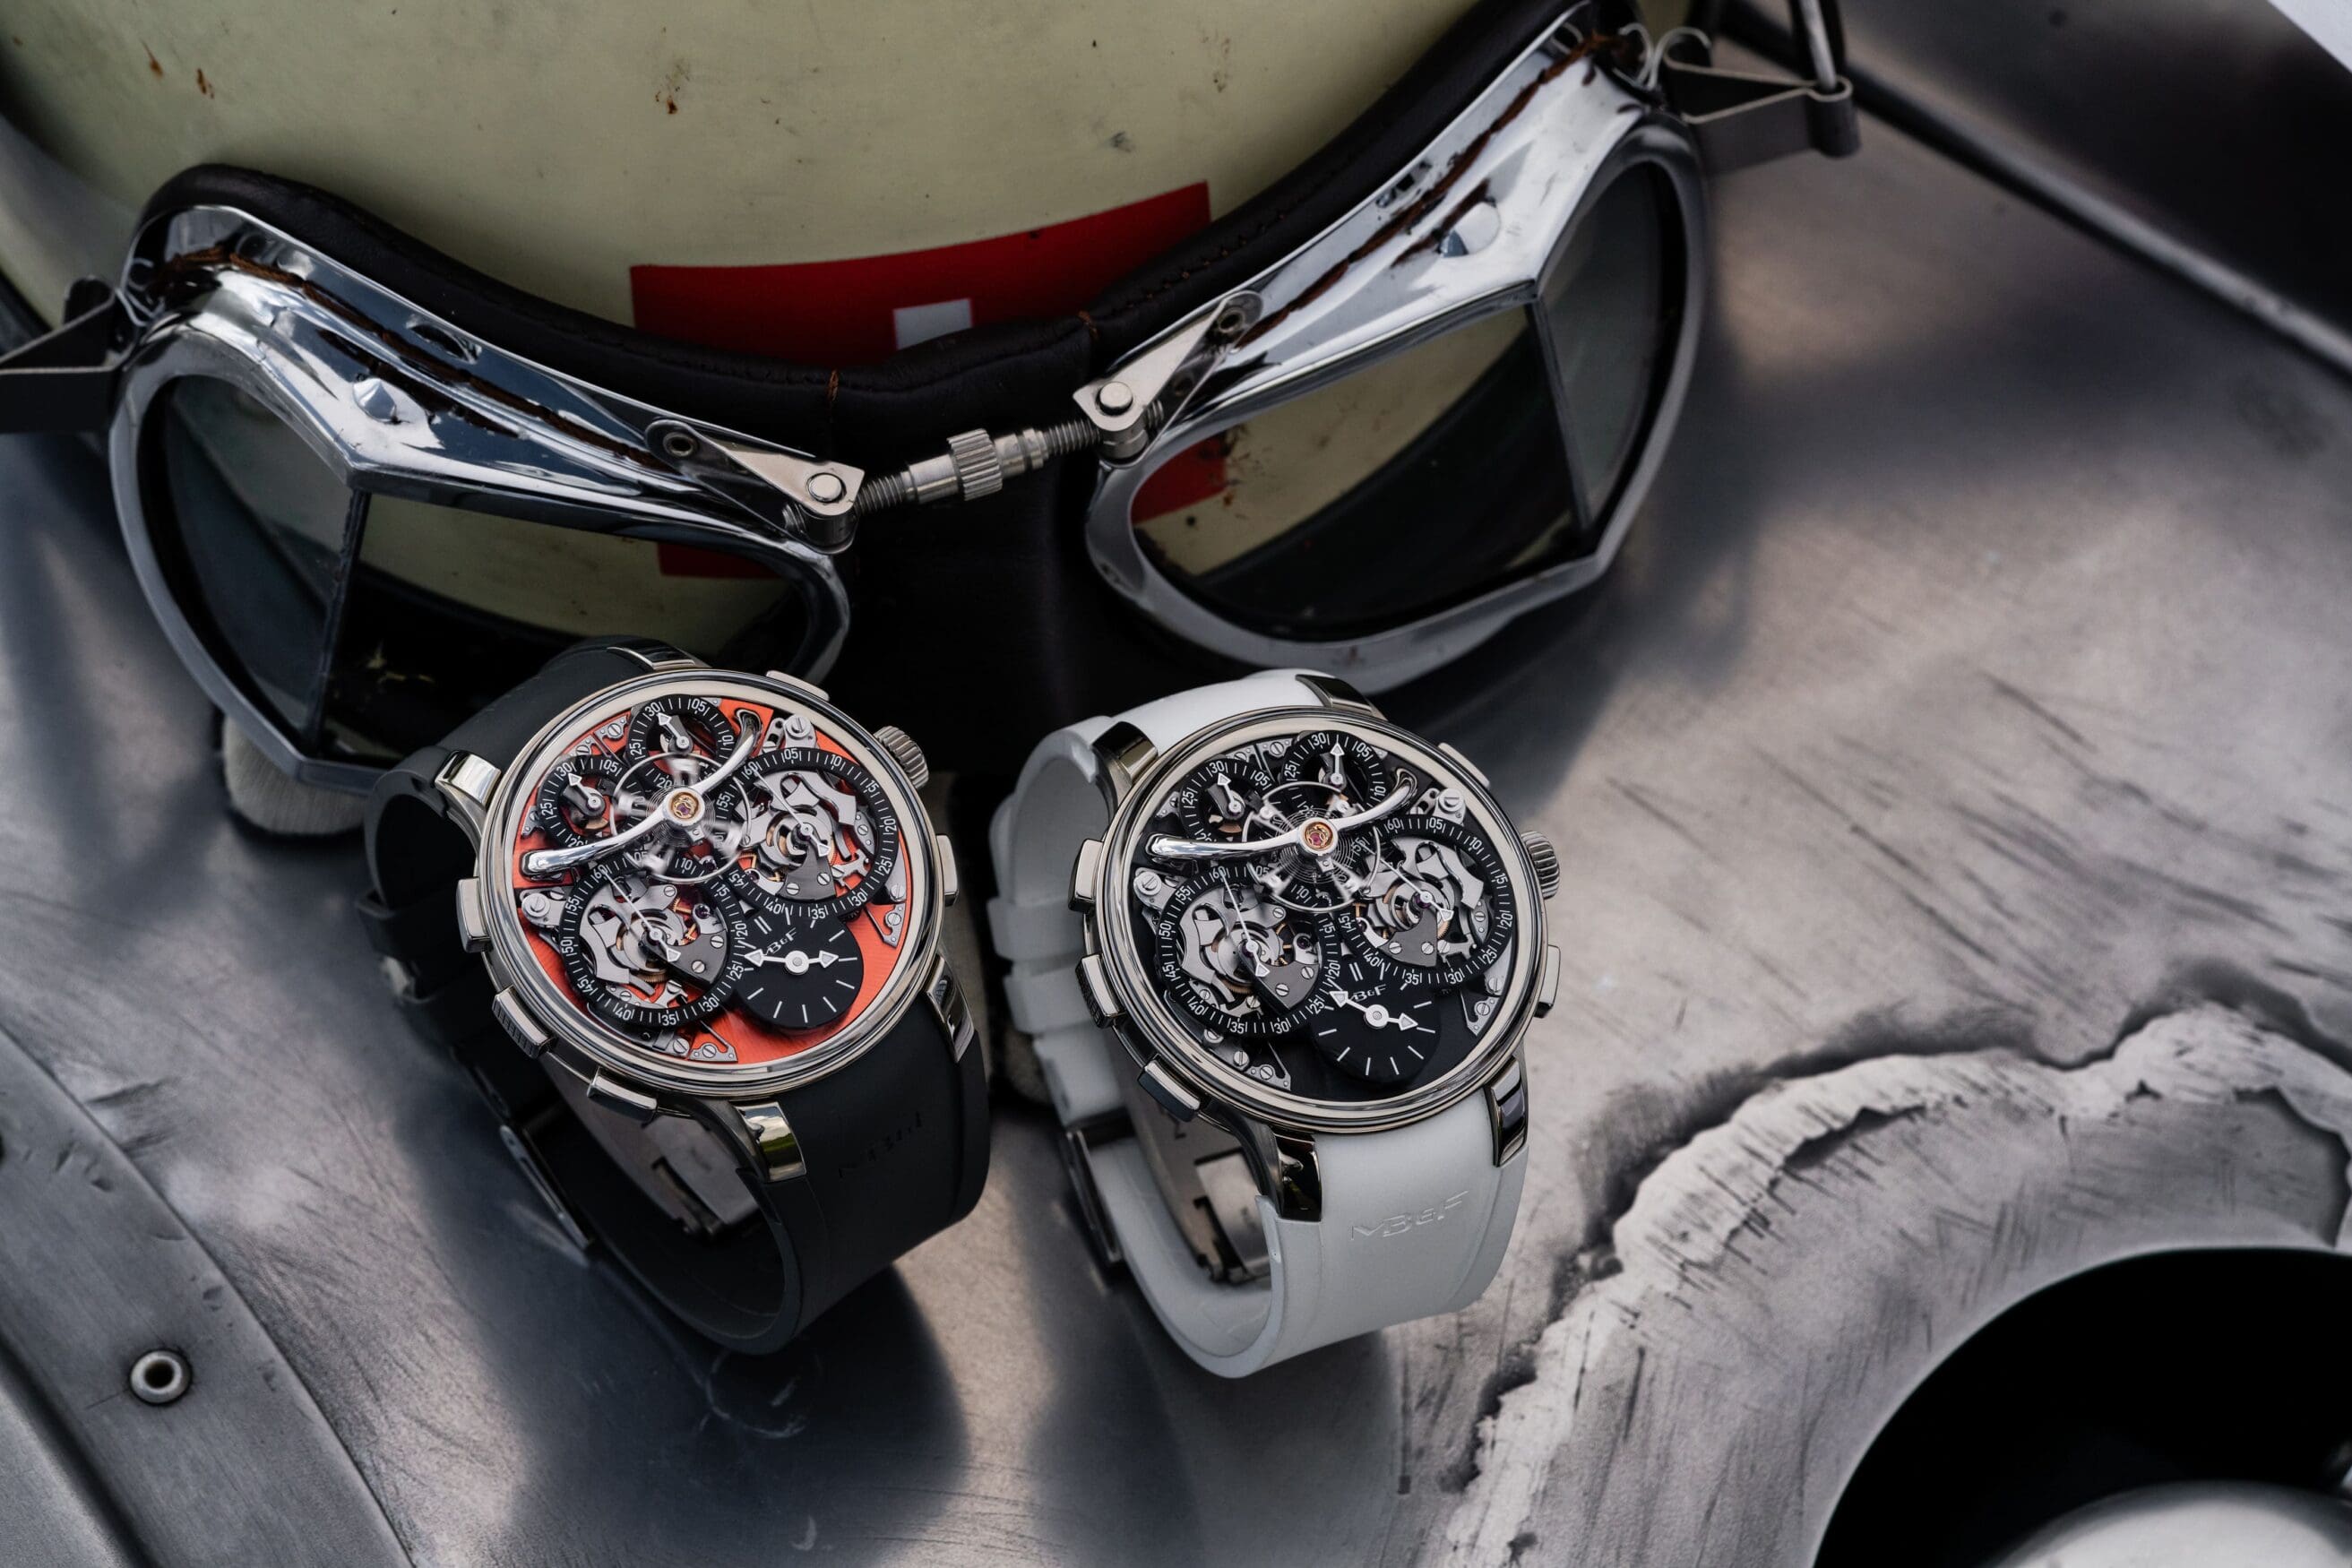 INTRODUCING: The MB&F LM Sequential EVO incorporates two chronographs in one watch